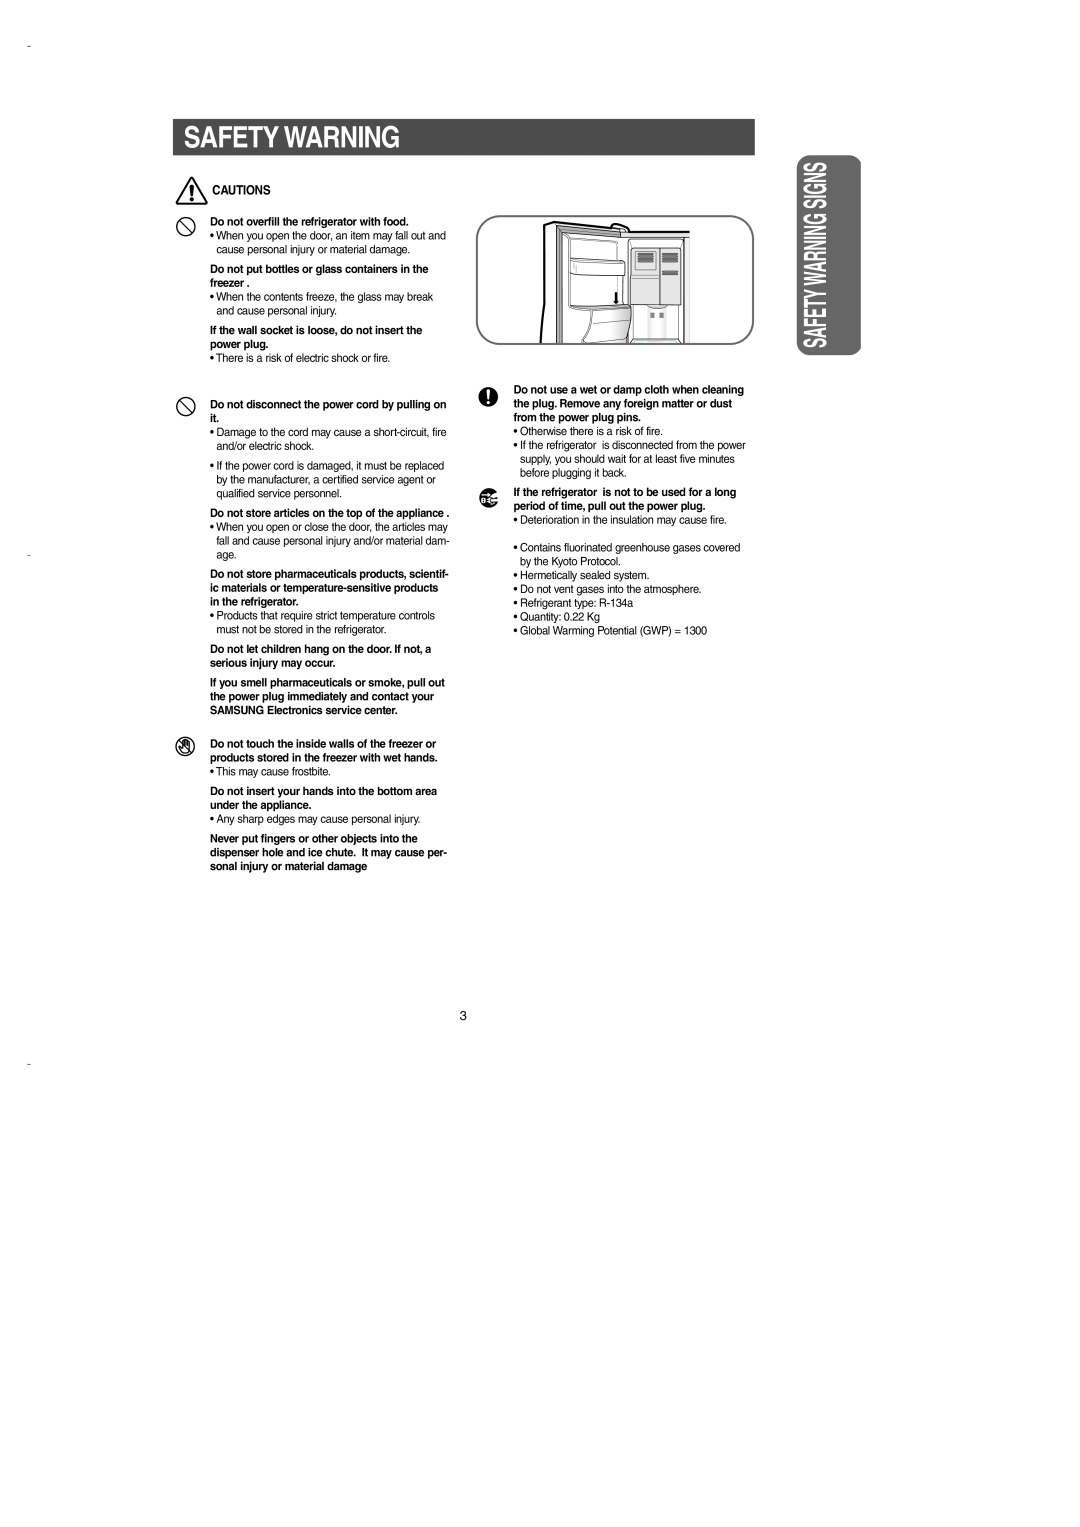 Samsung DA99-00275B owner manual Cautions, Safety Warning Signs 